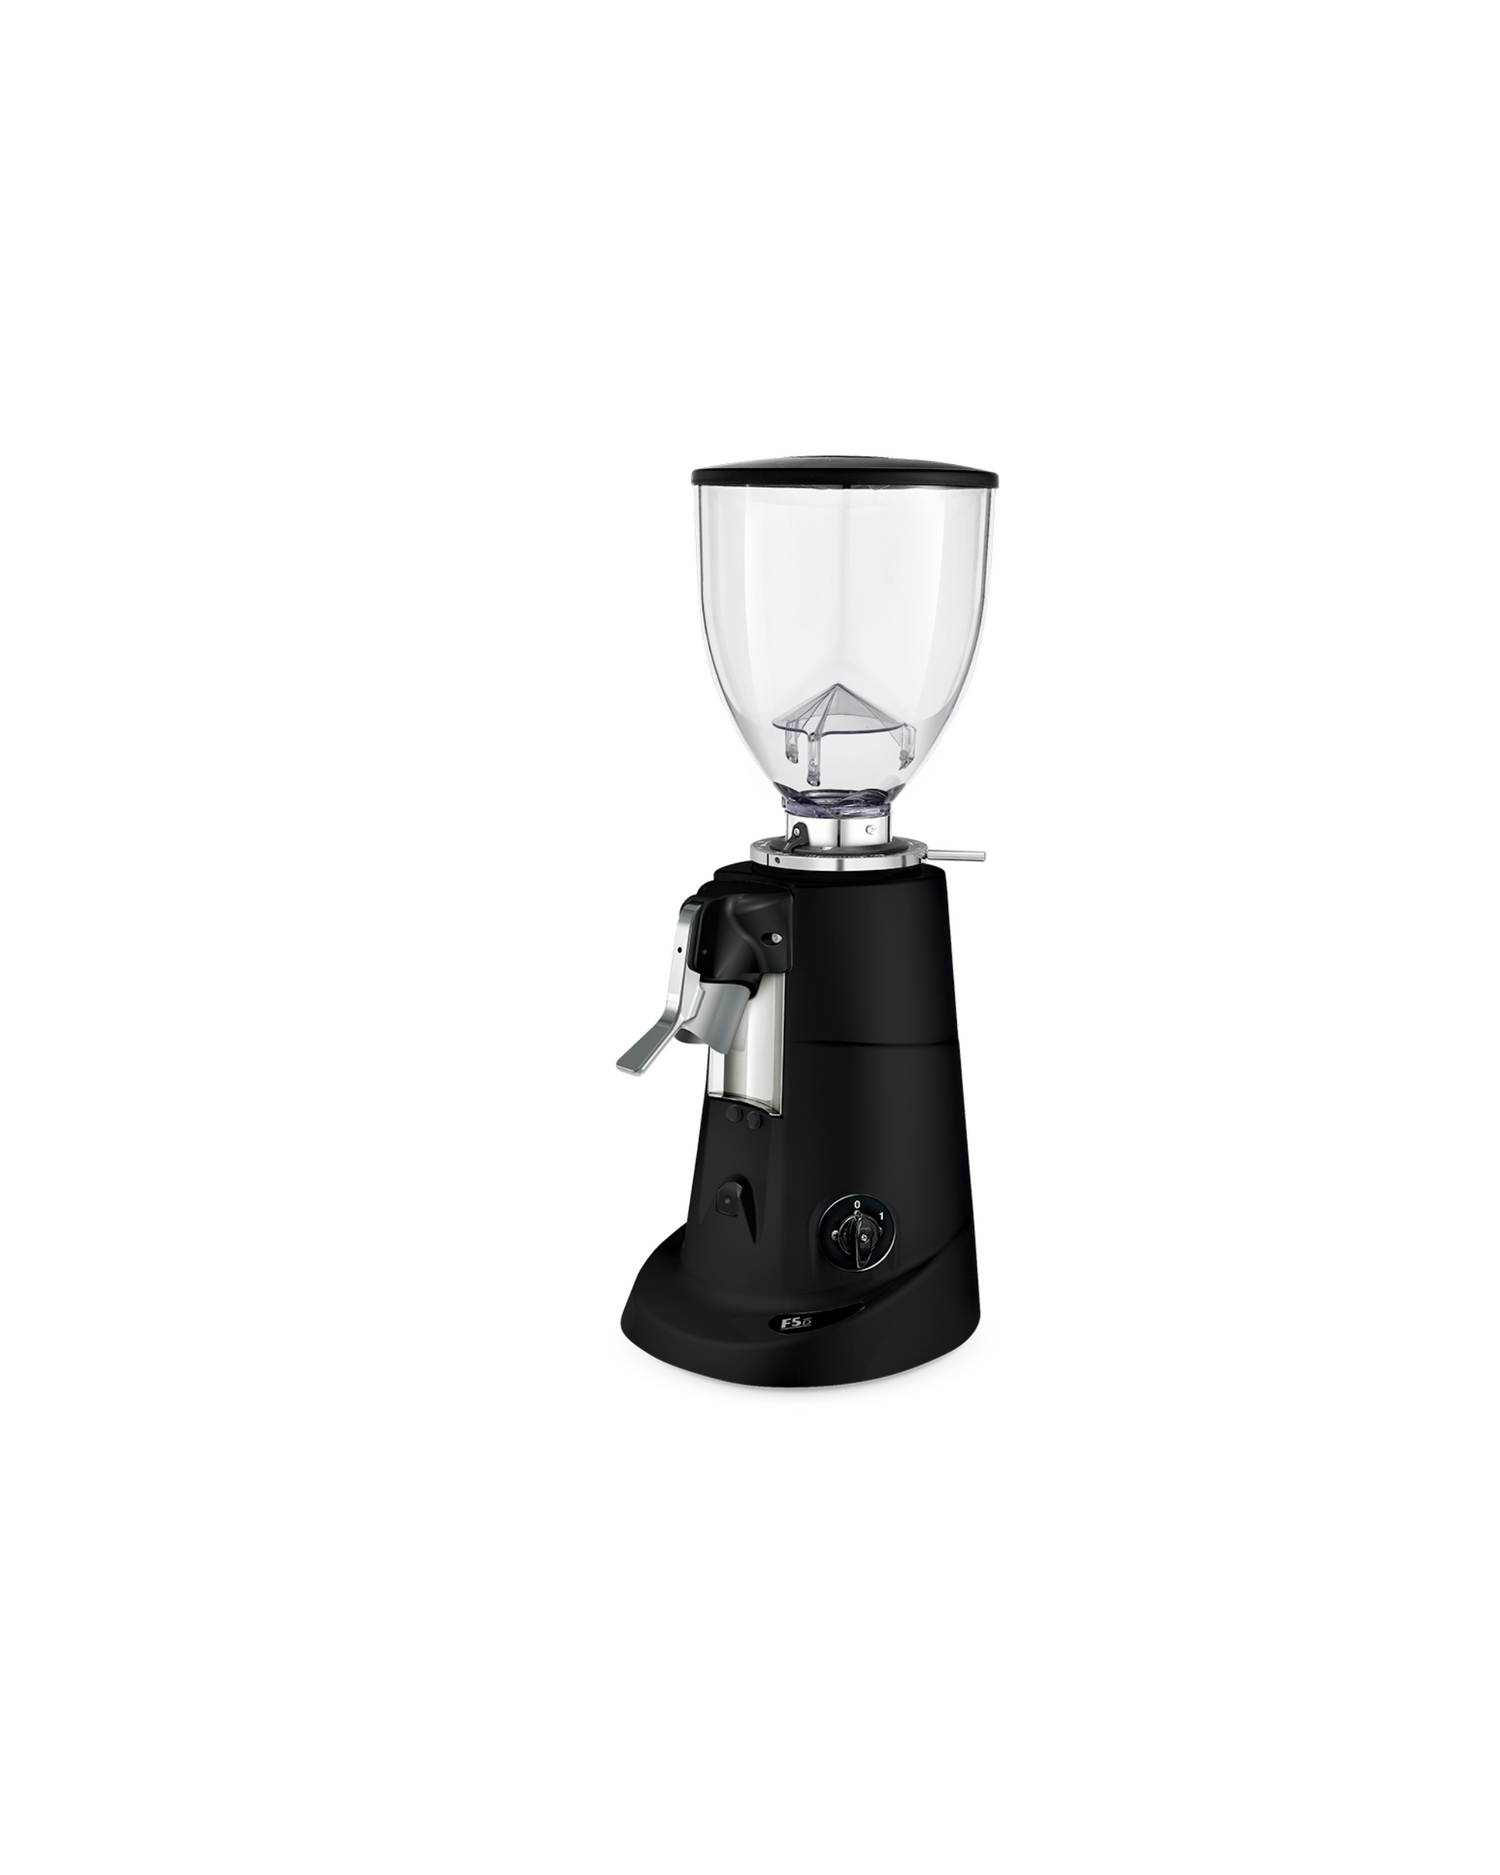 Commercial coffee grinders